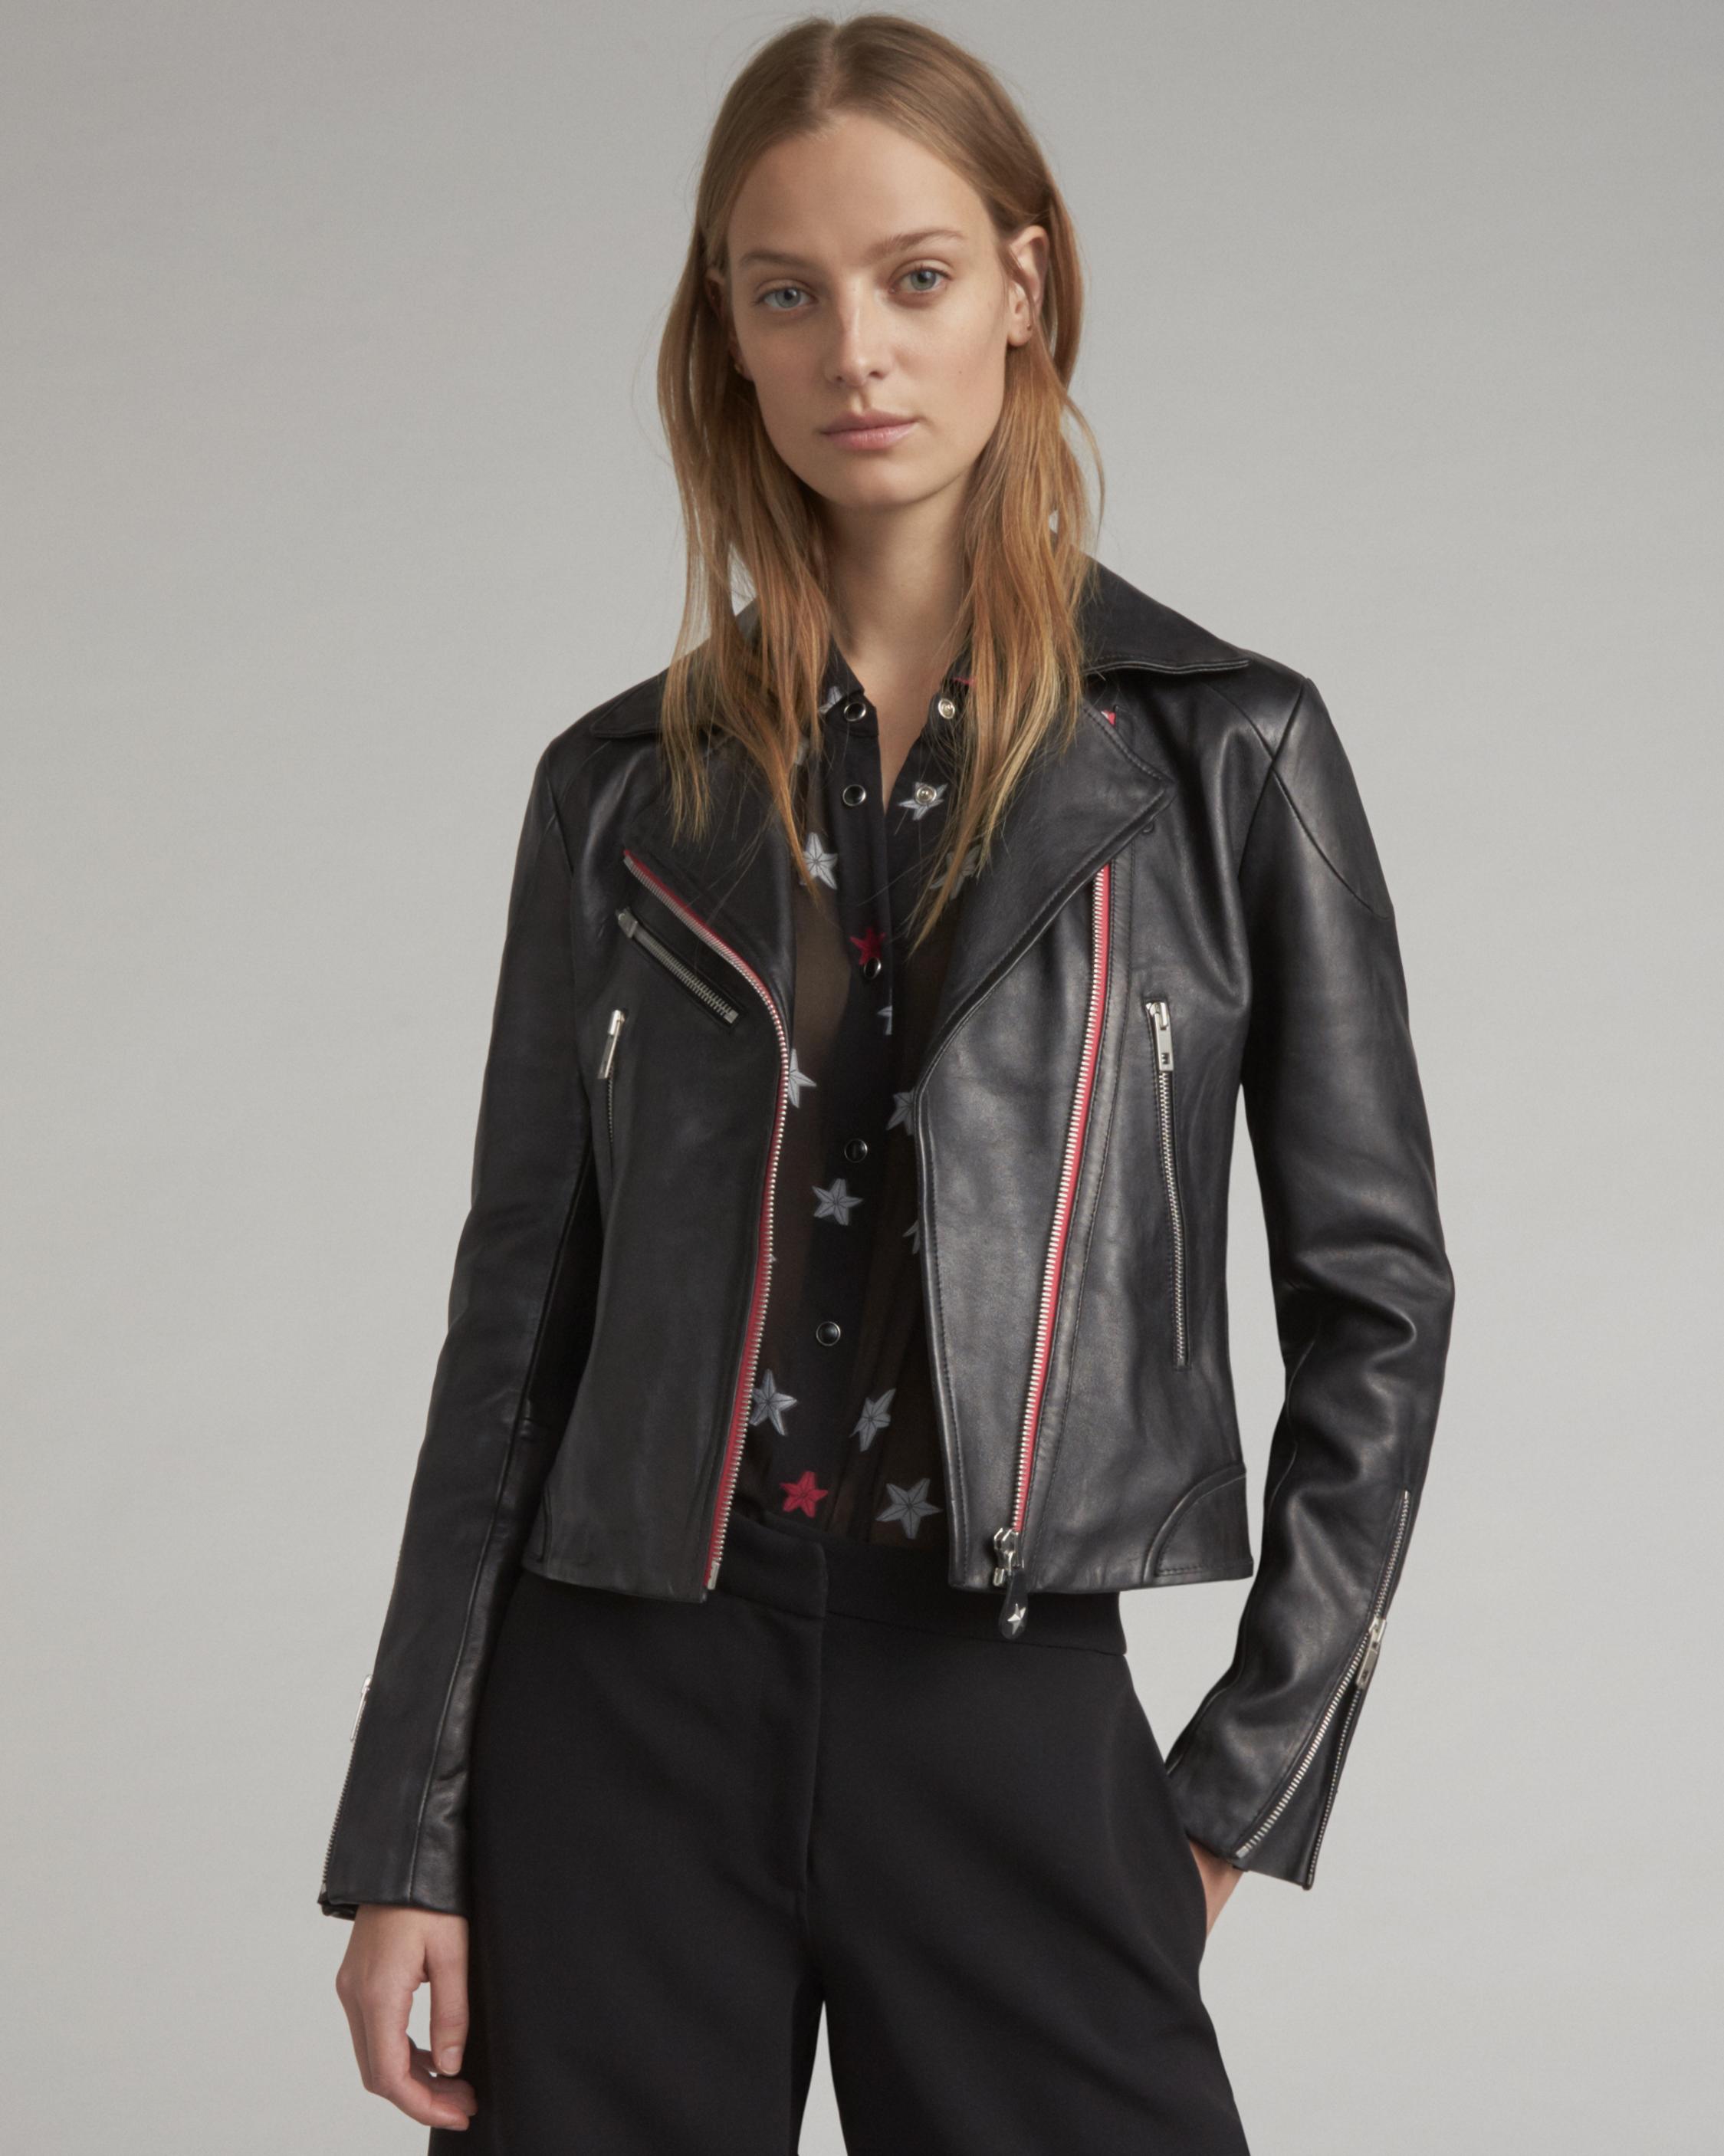 Coats, Jackets & Blazers: Leather Jackets to Jean, Bomber to Parka with